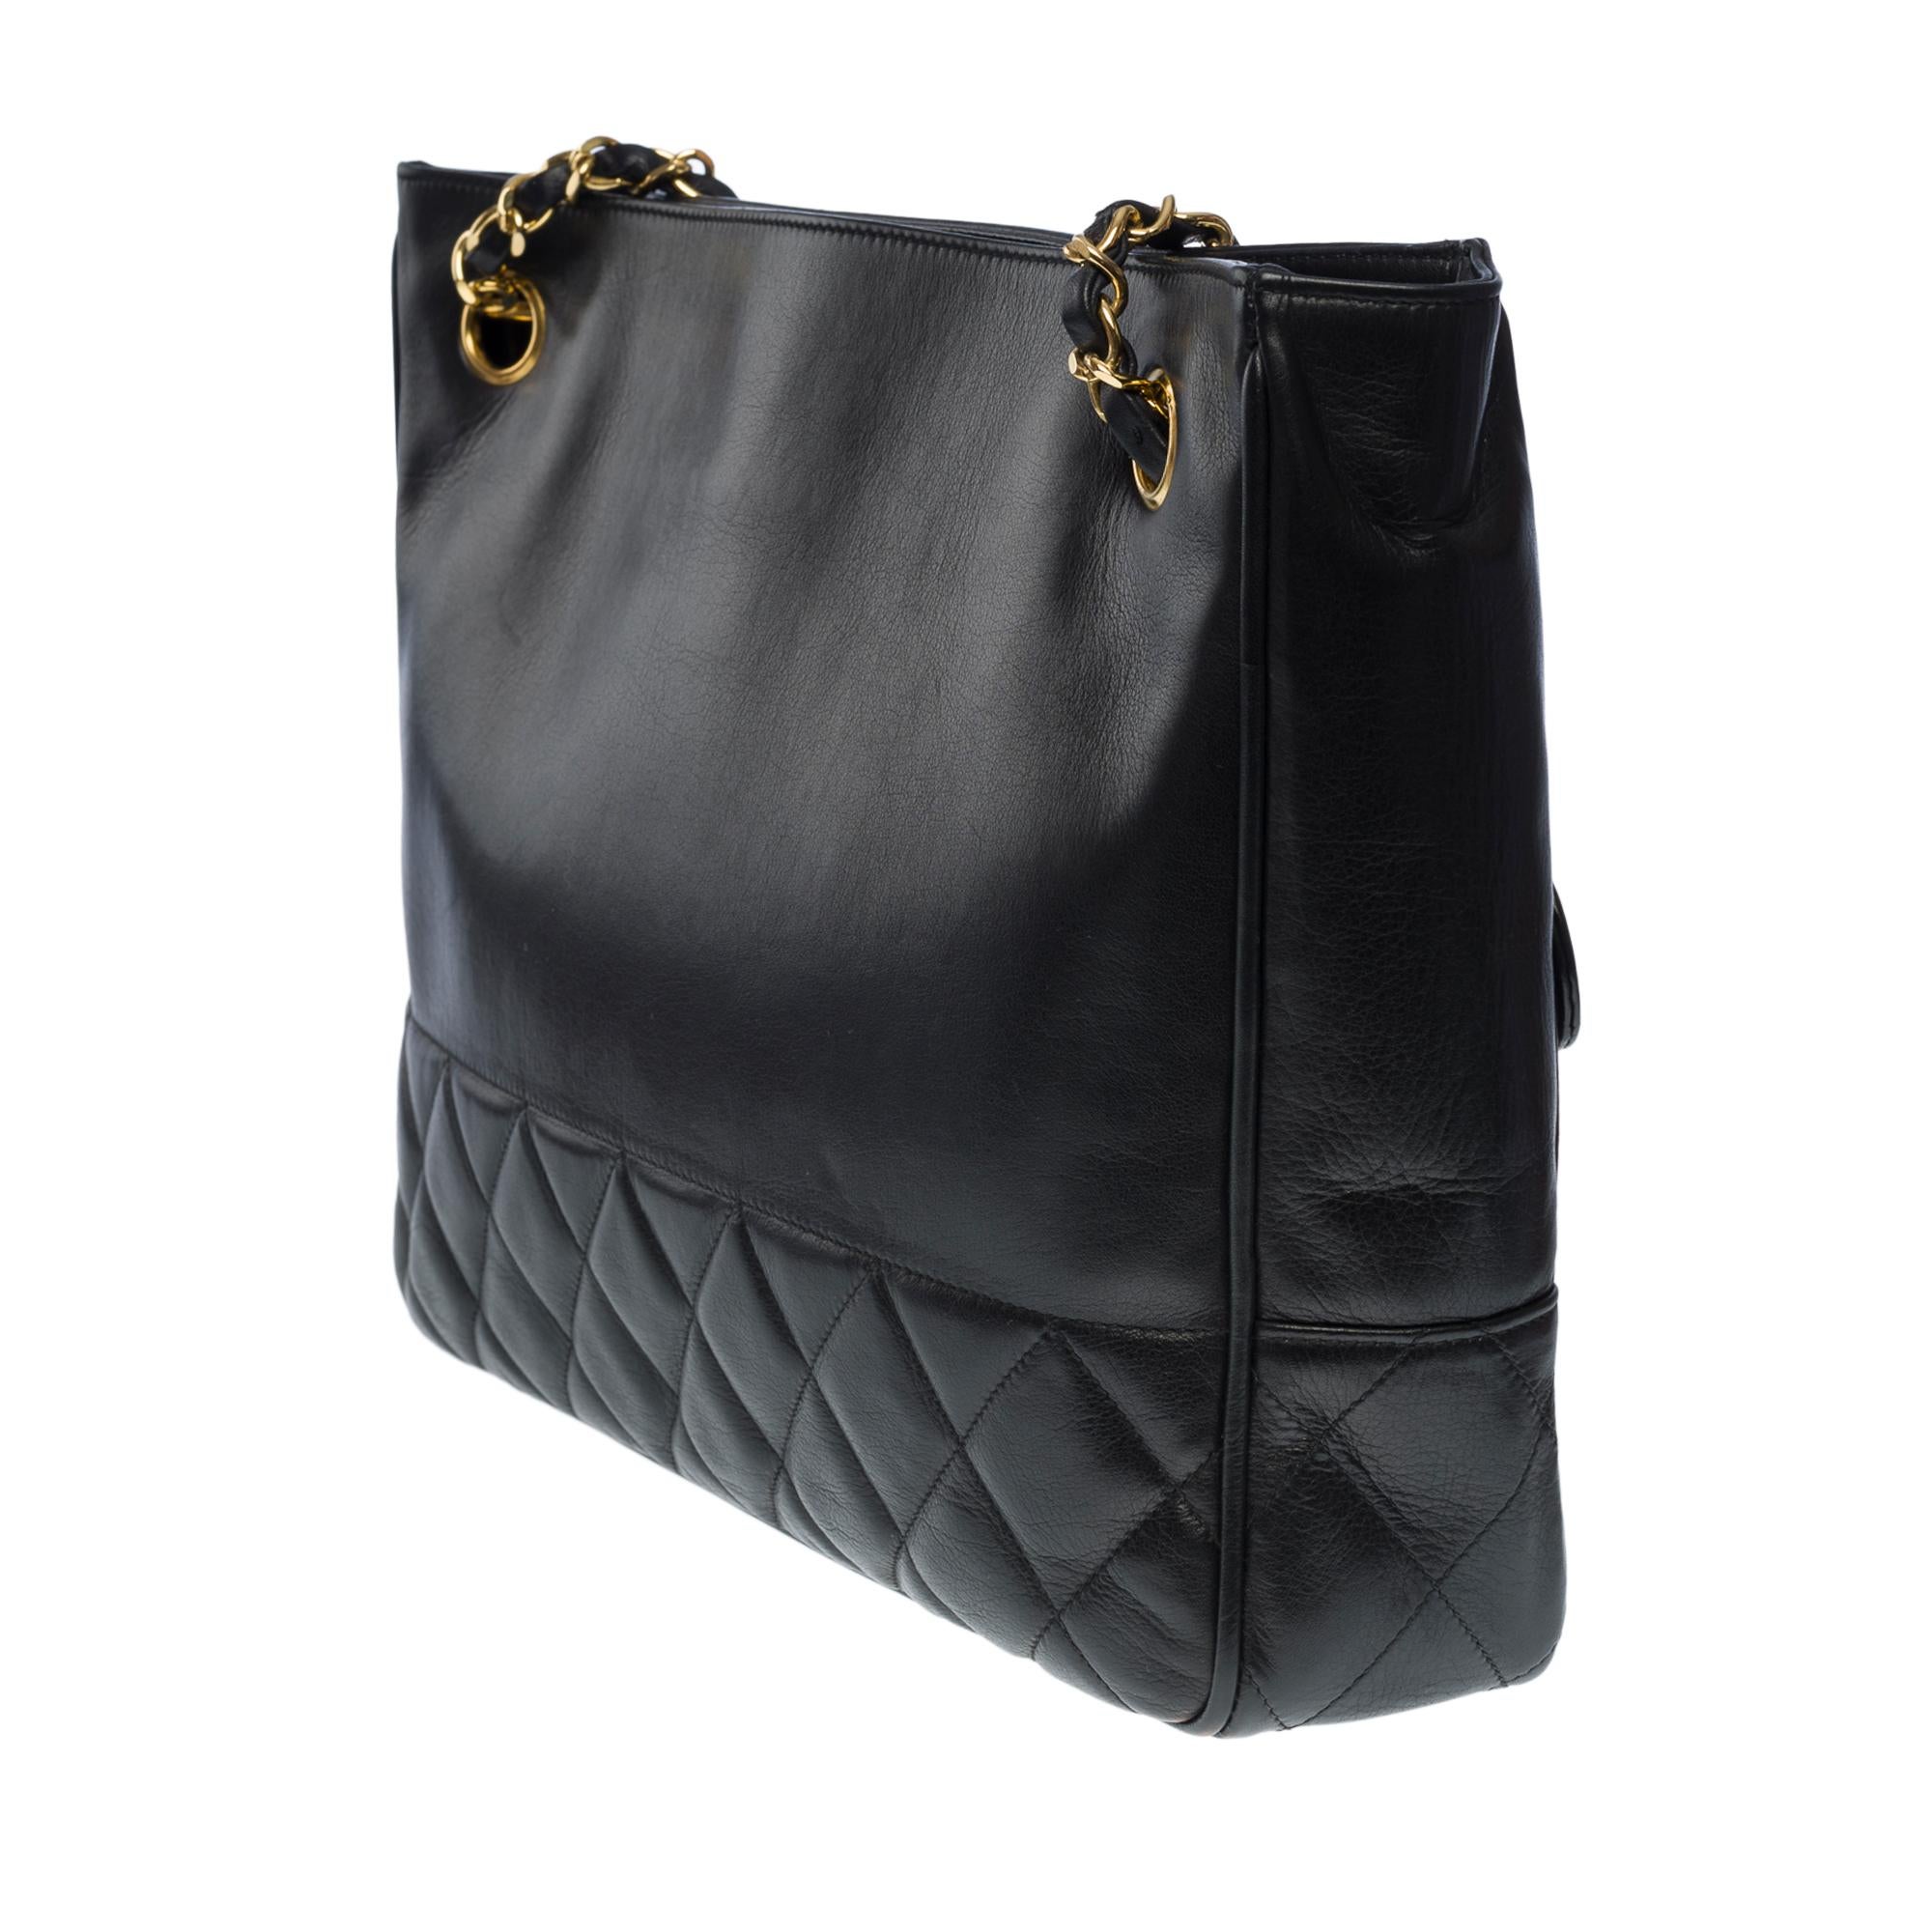 Women's Charming Chanel Classic Shopping Tote bag in black quilted lambskin leather, GHW